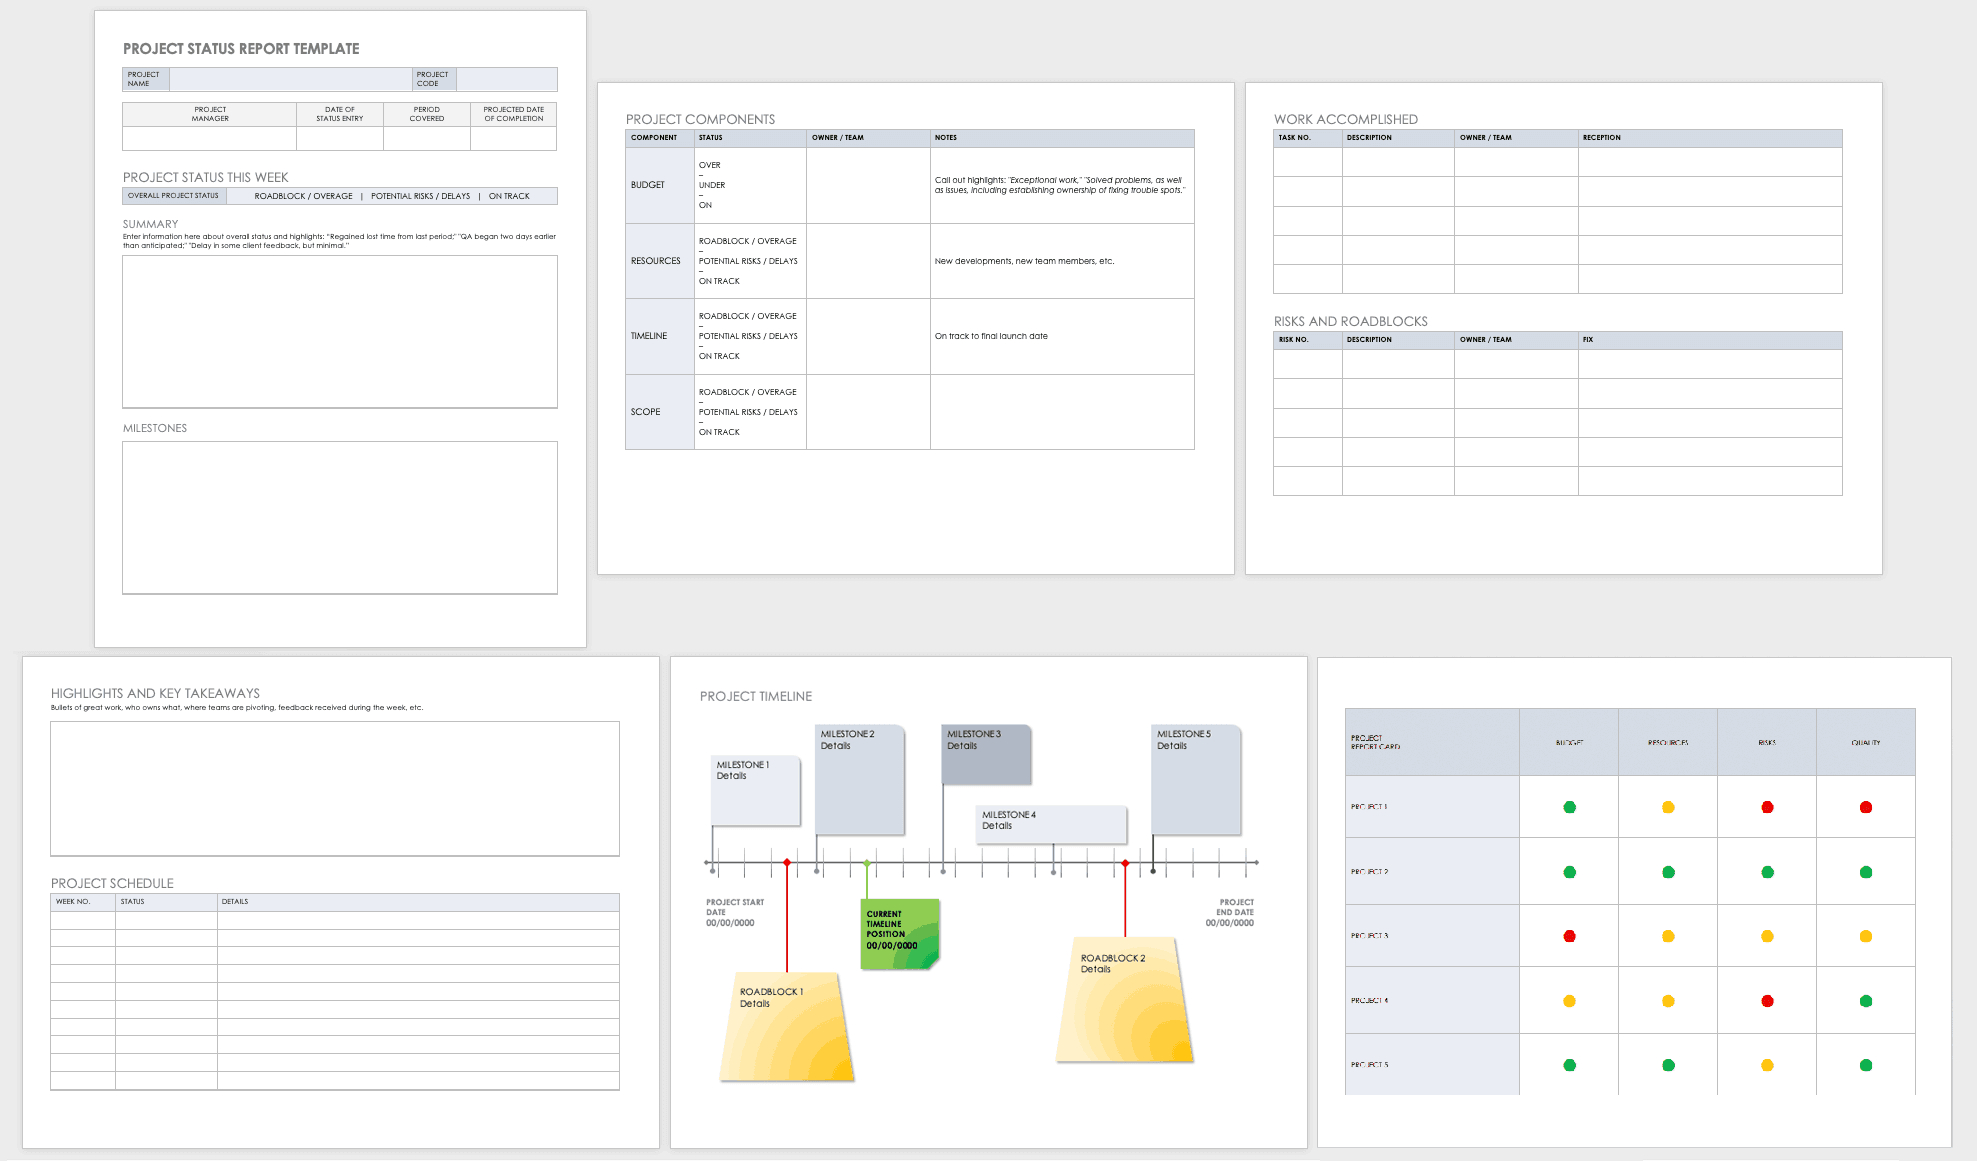 Free Project Report Templates | Smartsheet With Regard To Project Daily Status Report Template